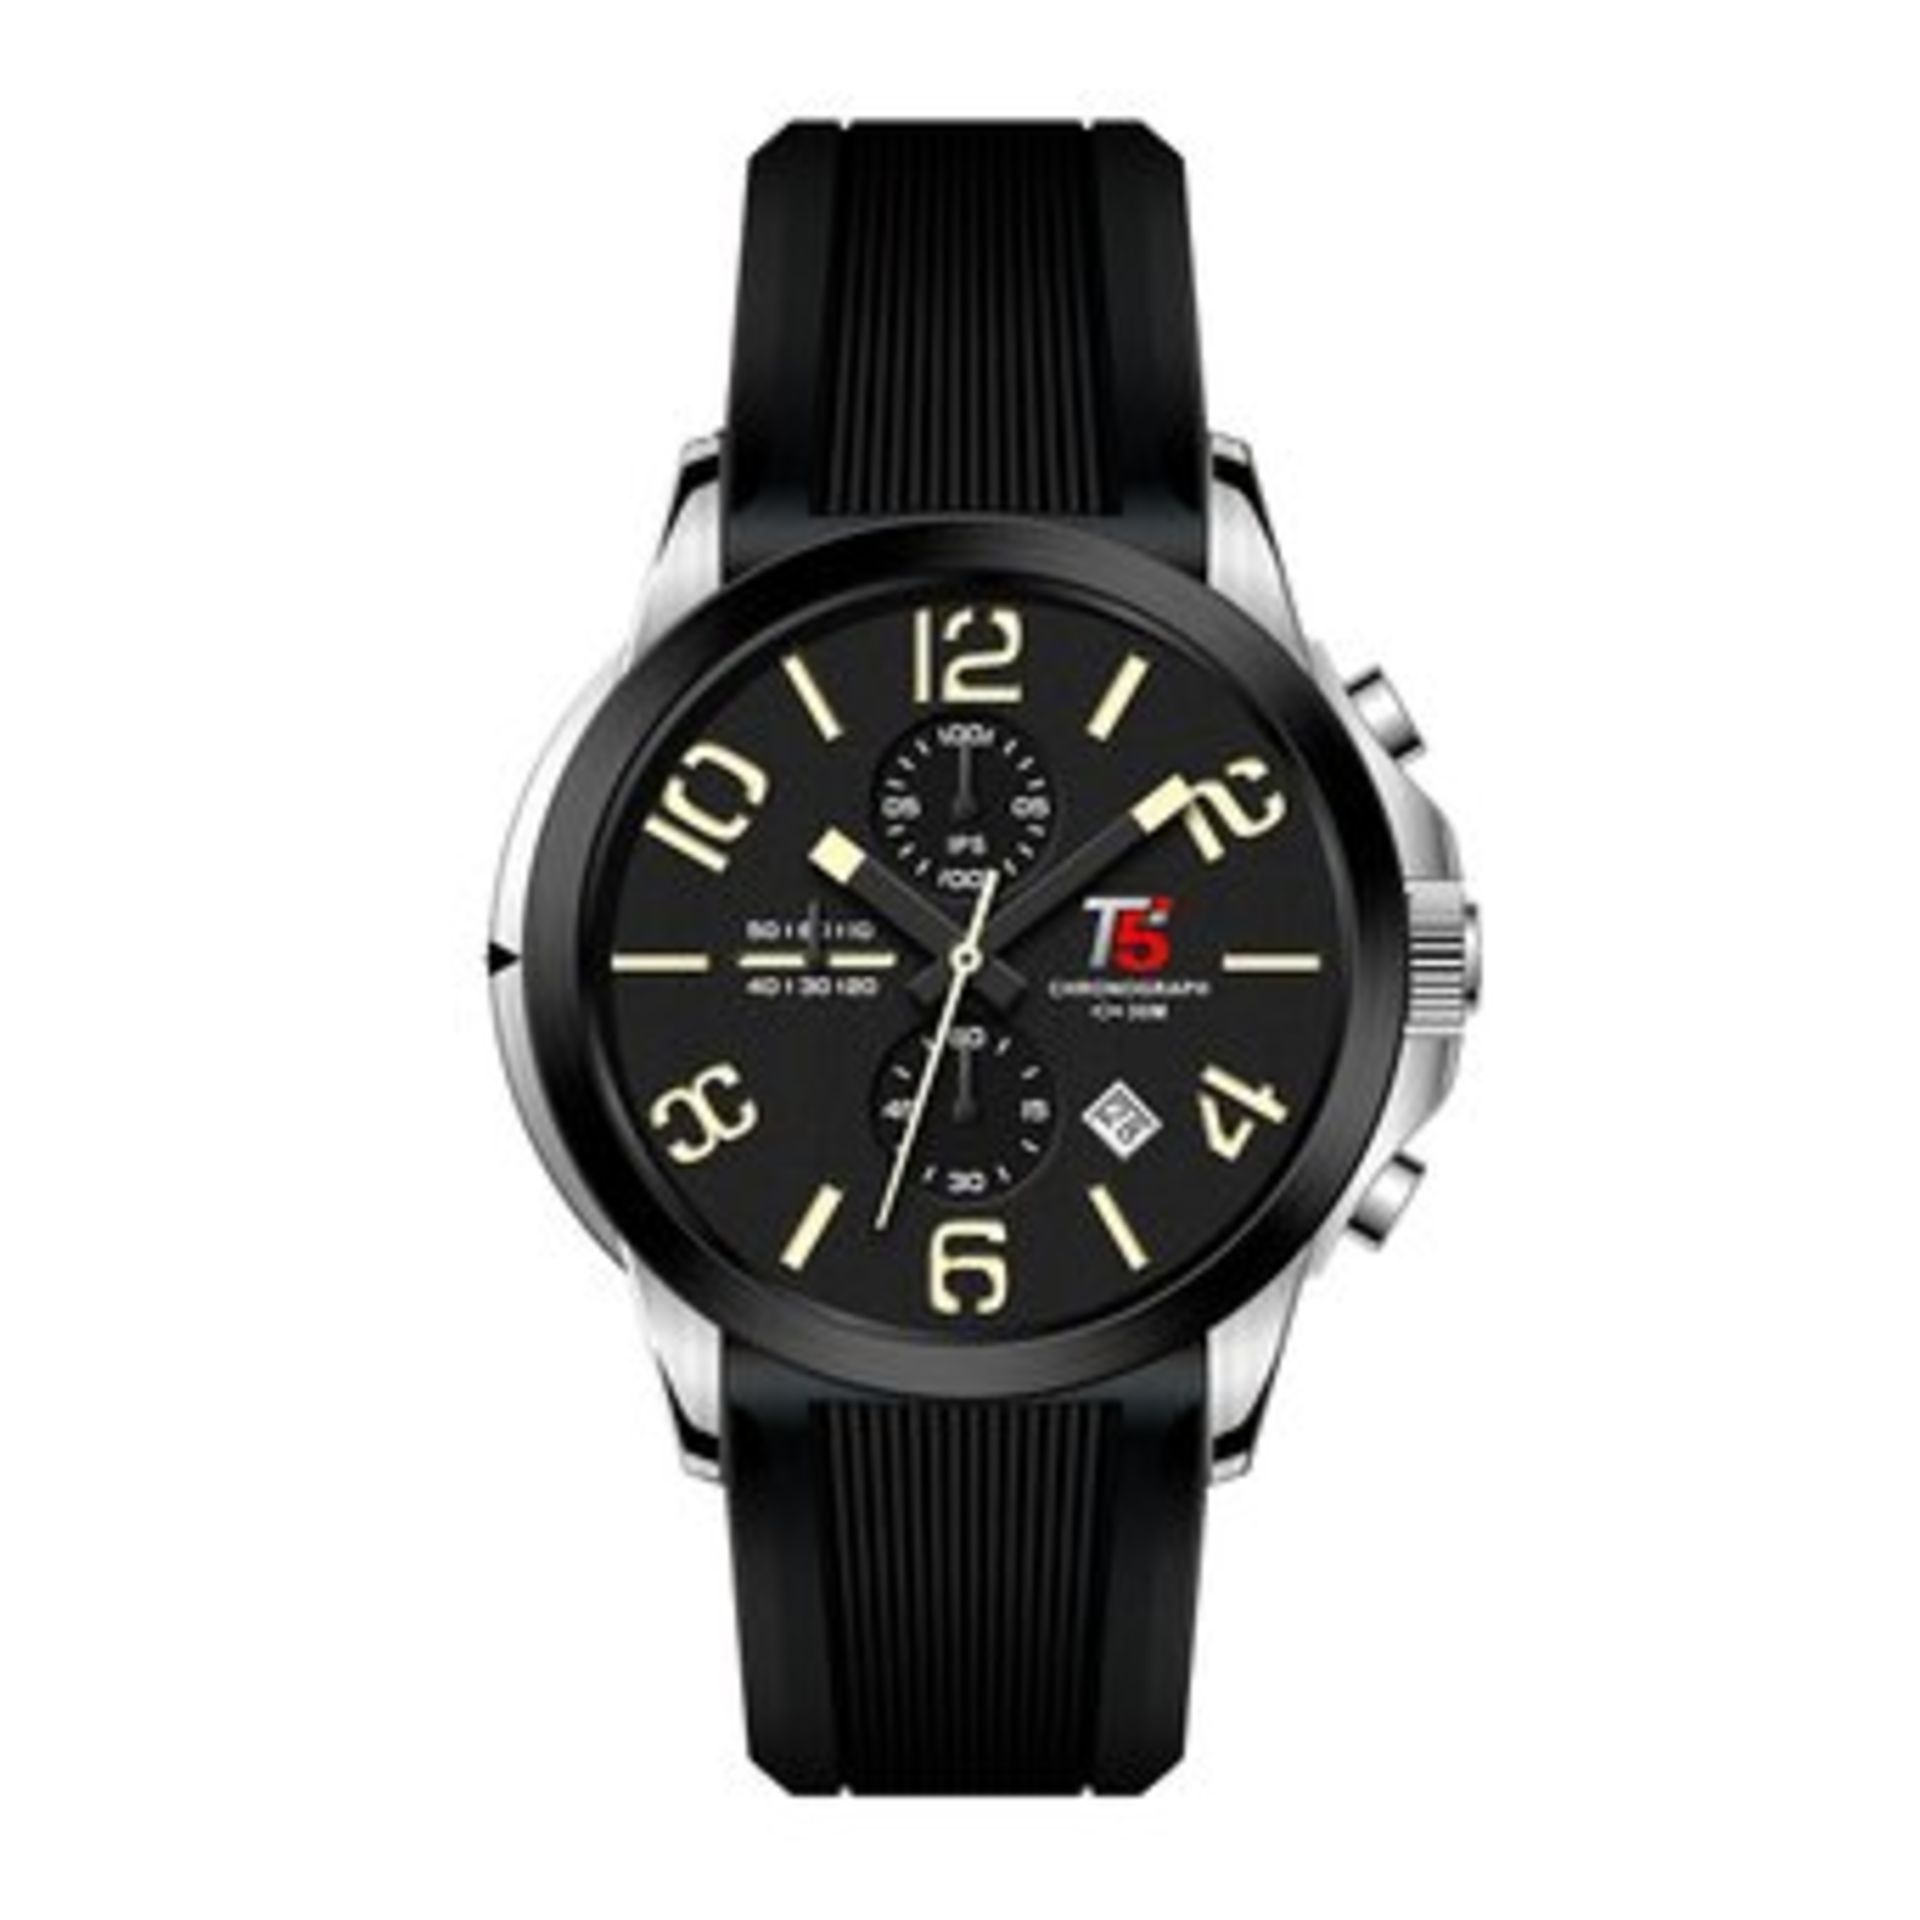 The T5 Lennox L1 watch features a black chronograph dial, black hands, with off white numbers.